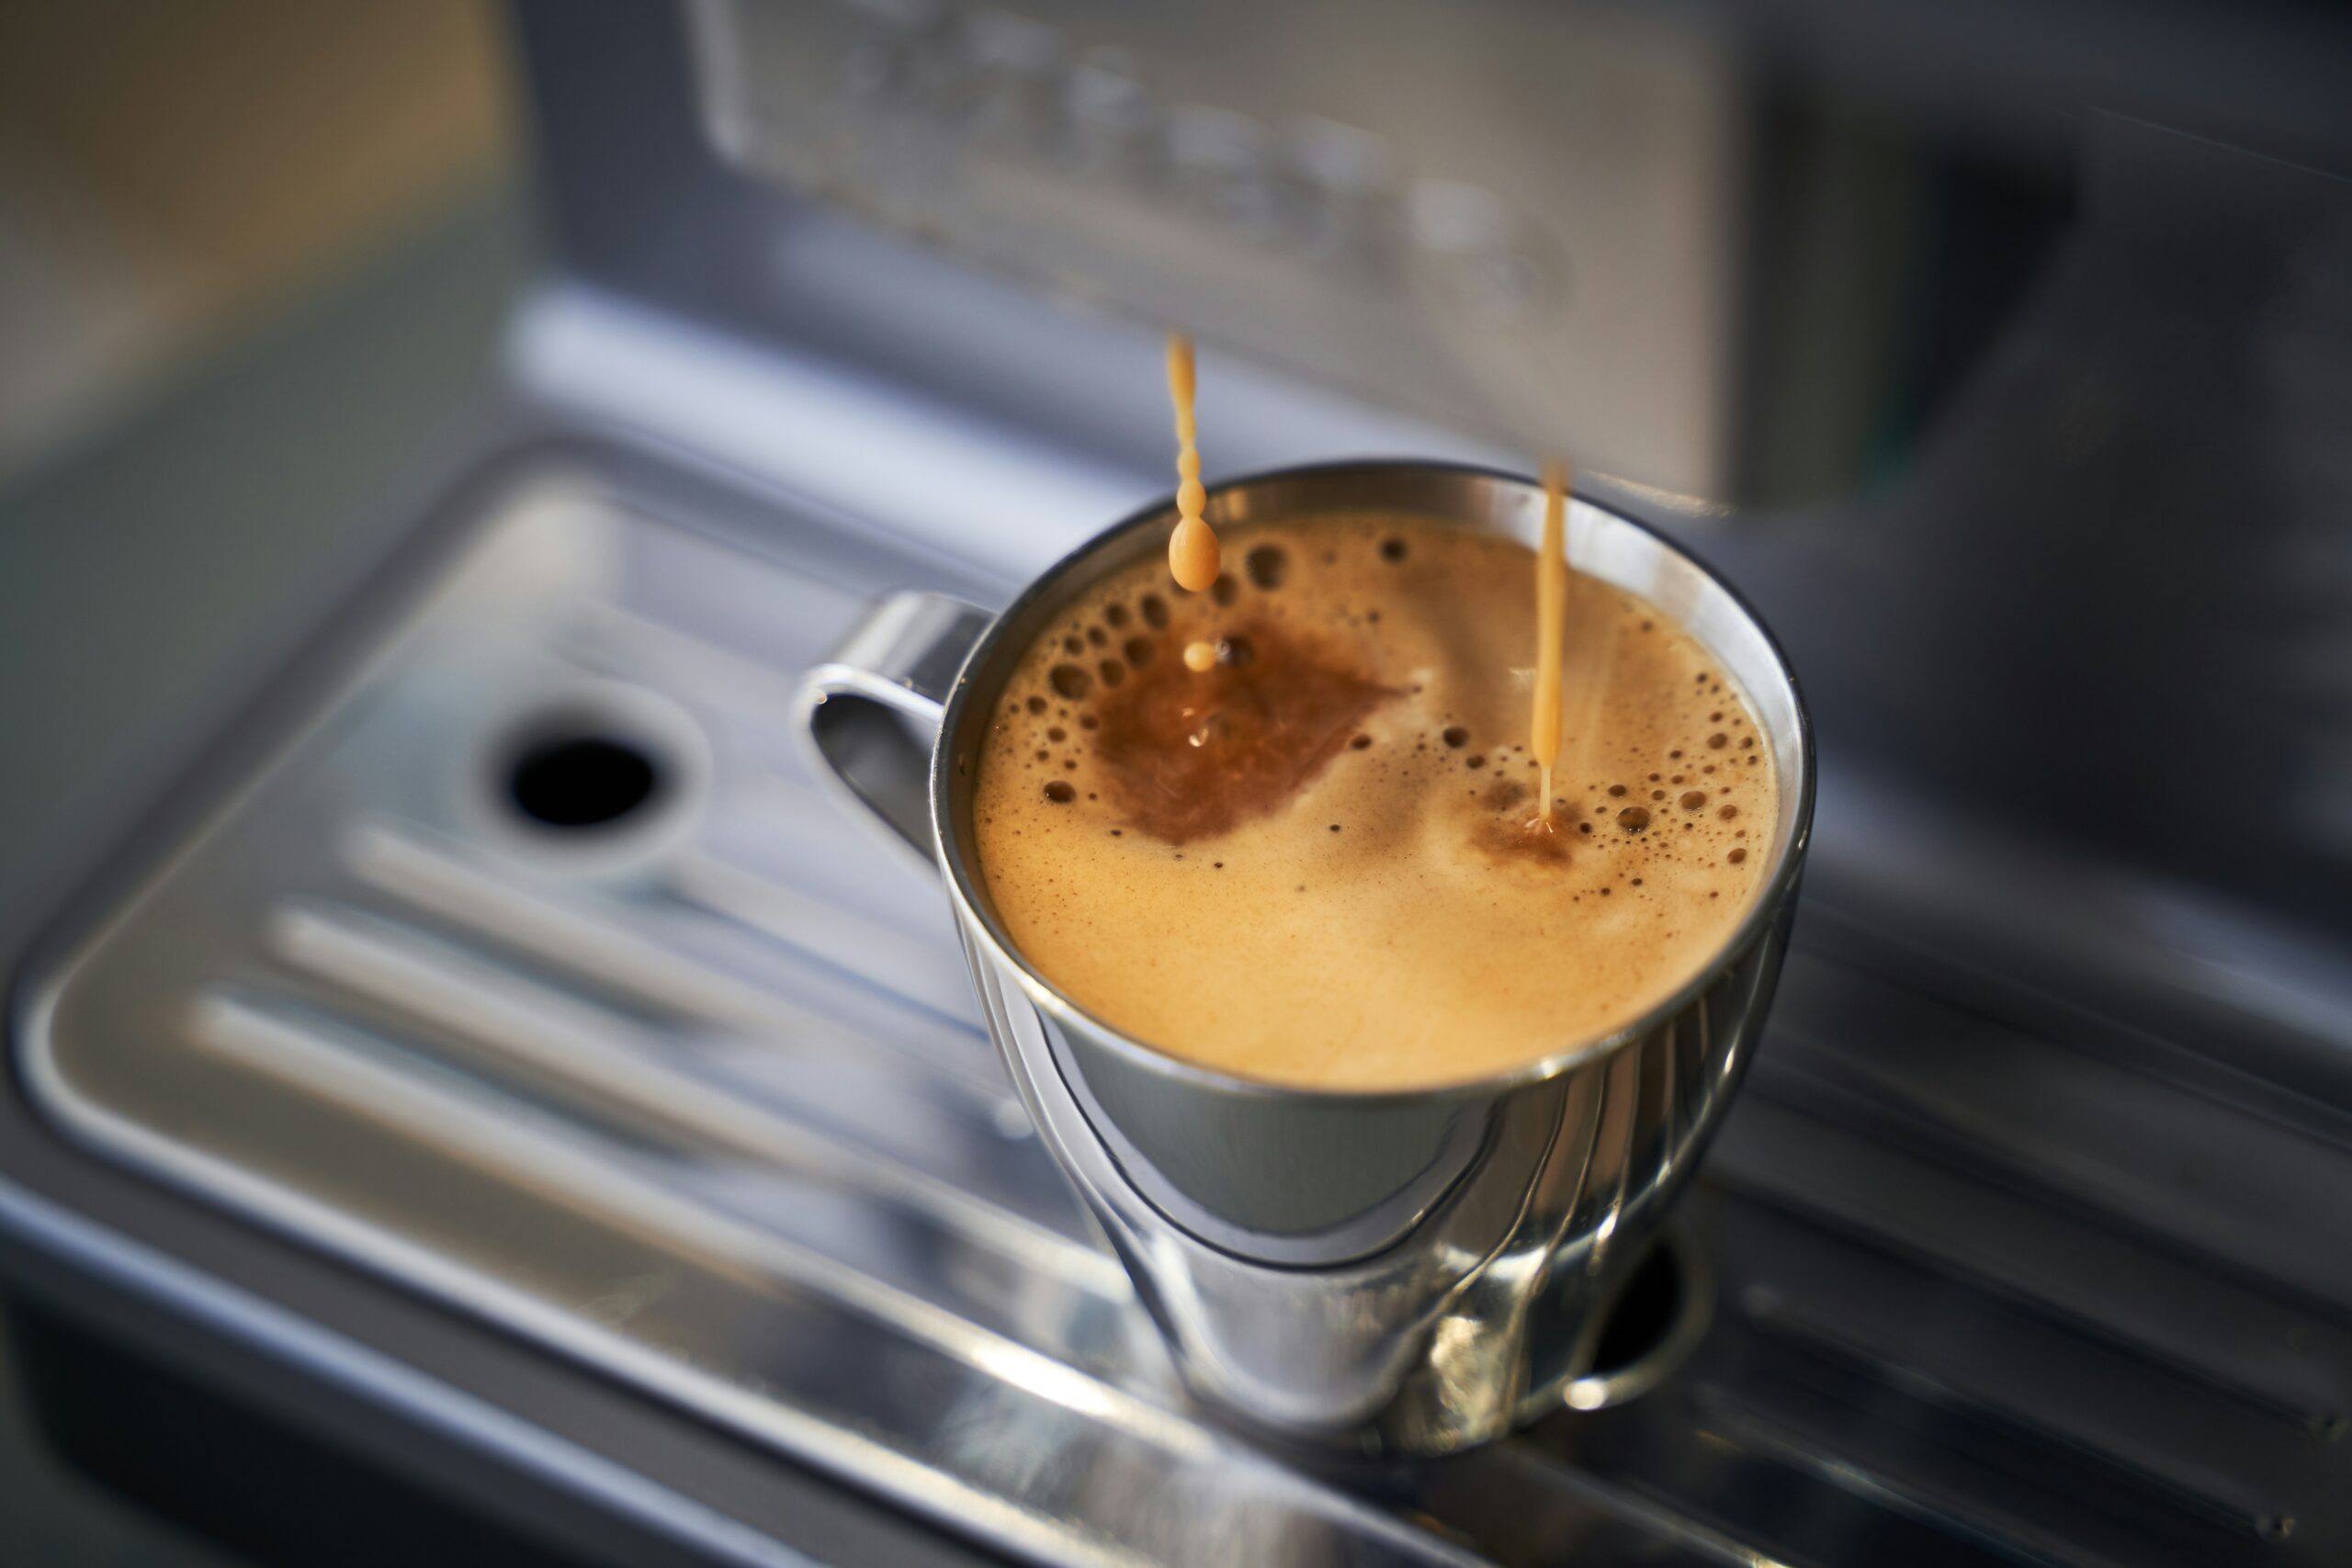 Make a delicious cup of coffee with Black Ivory Coffee, one of the most expensive brands. Pictured: An espresso shot